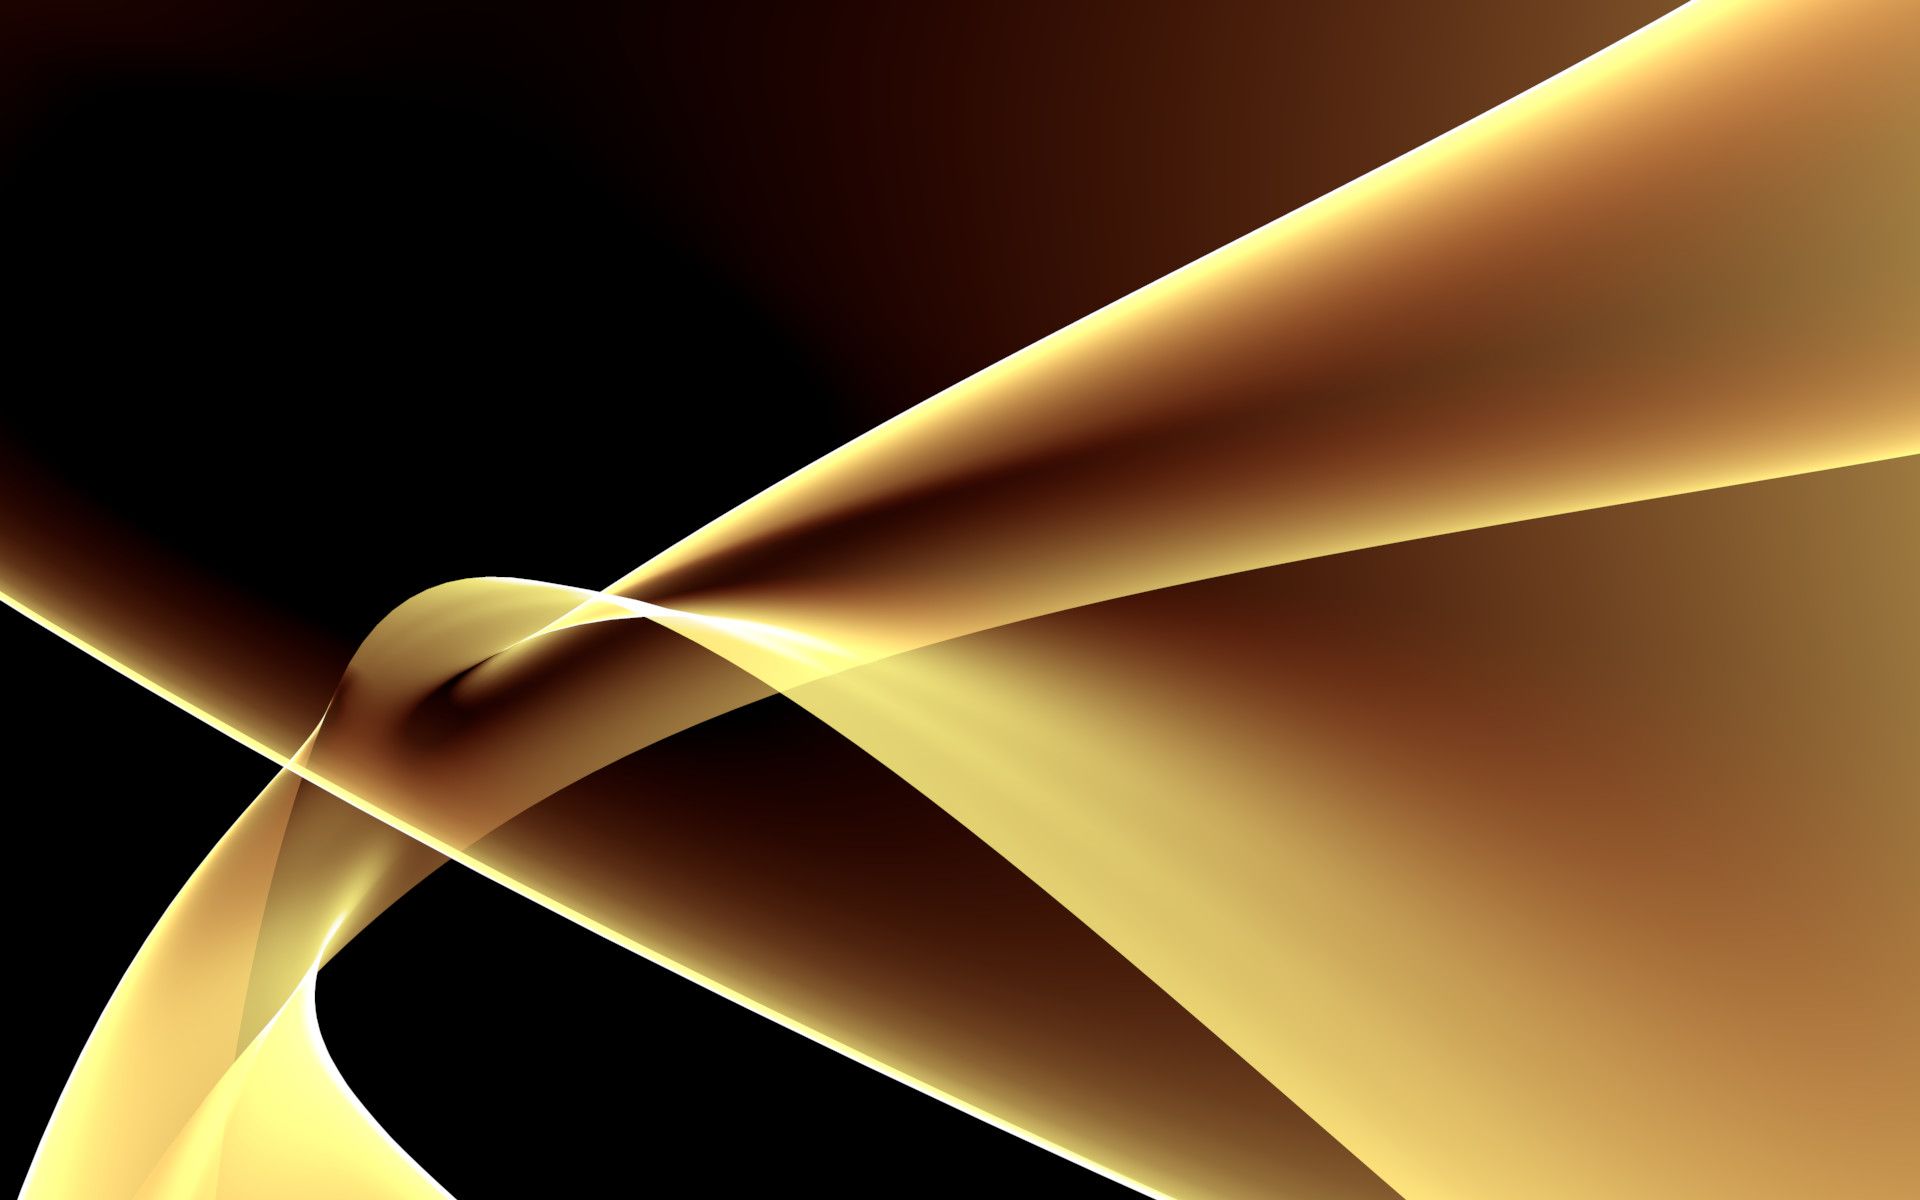 Black And Gold Background Photos Download The BEST Free Black And Gold  Background Stock Photos  HD Images